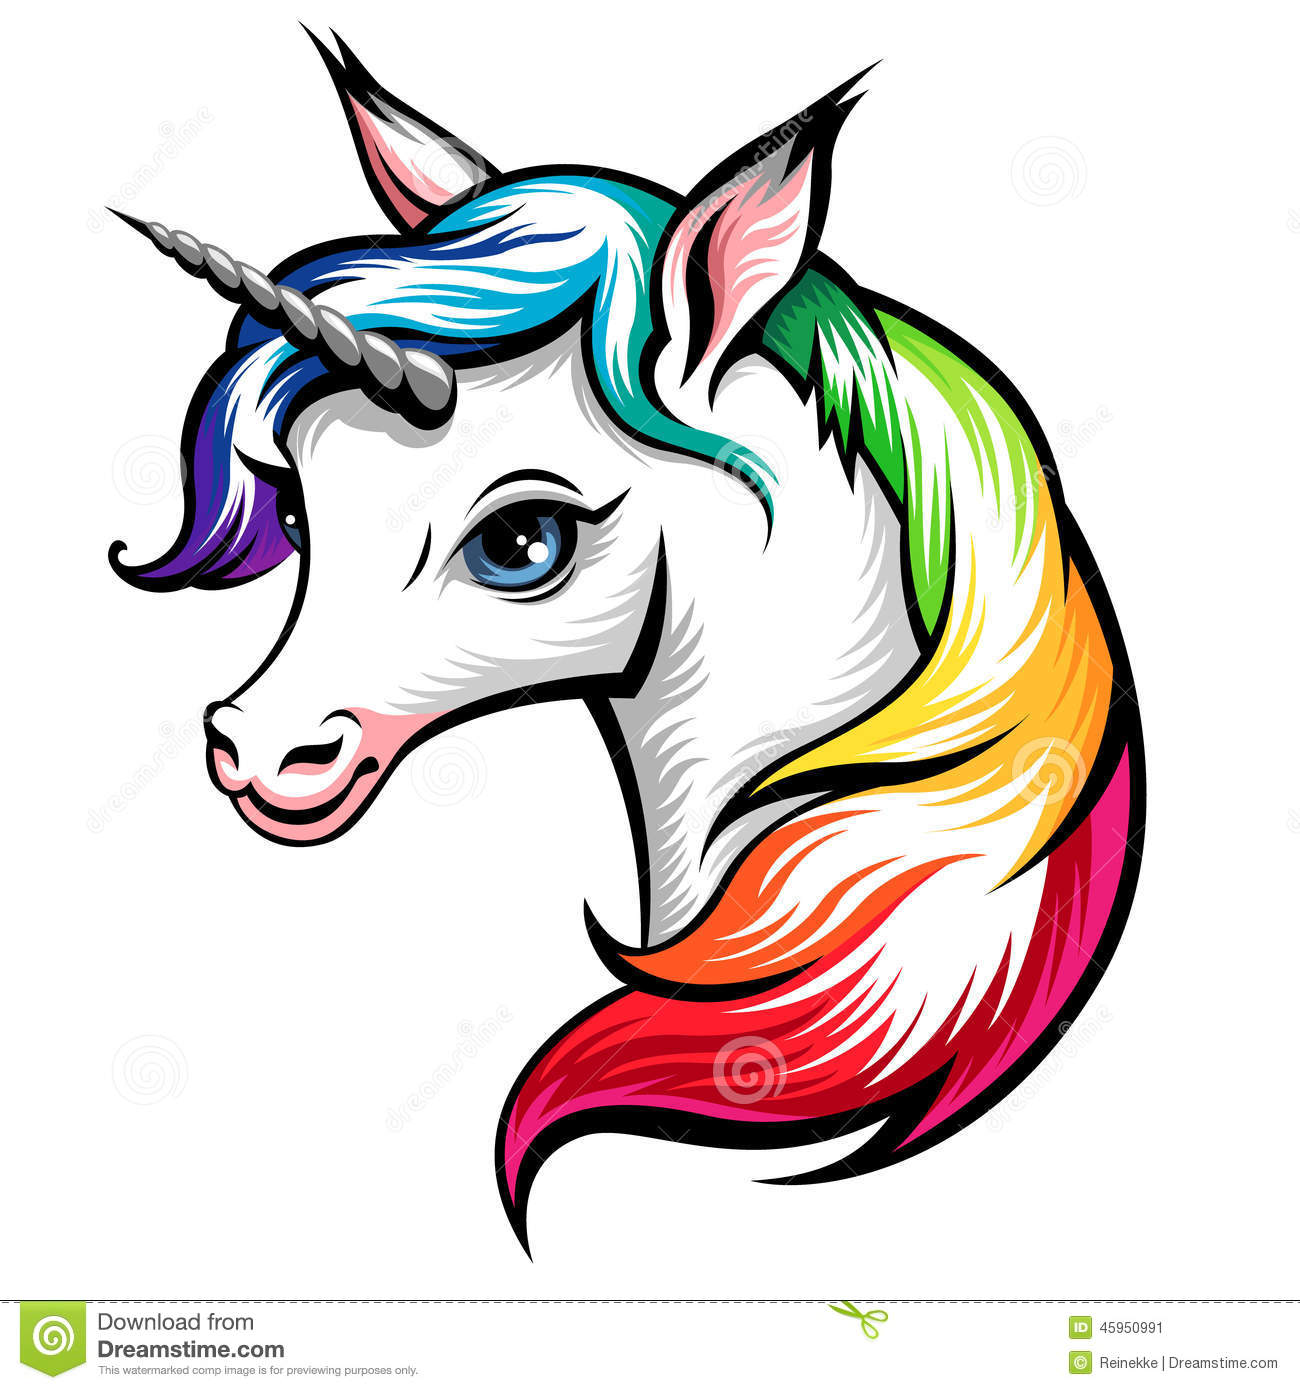 Unicorn Wallpapers Fantasy Hq Unicorn Pictures 4k Wallpapers 2019